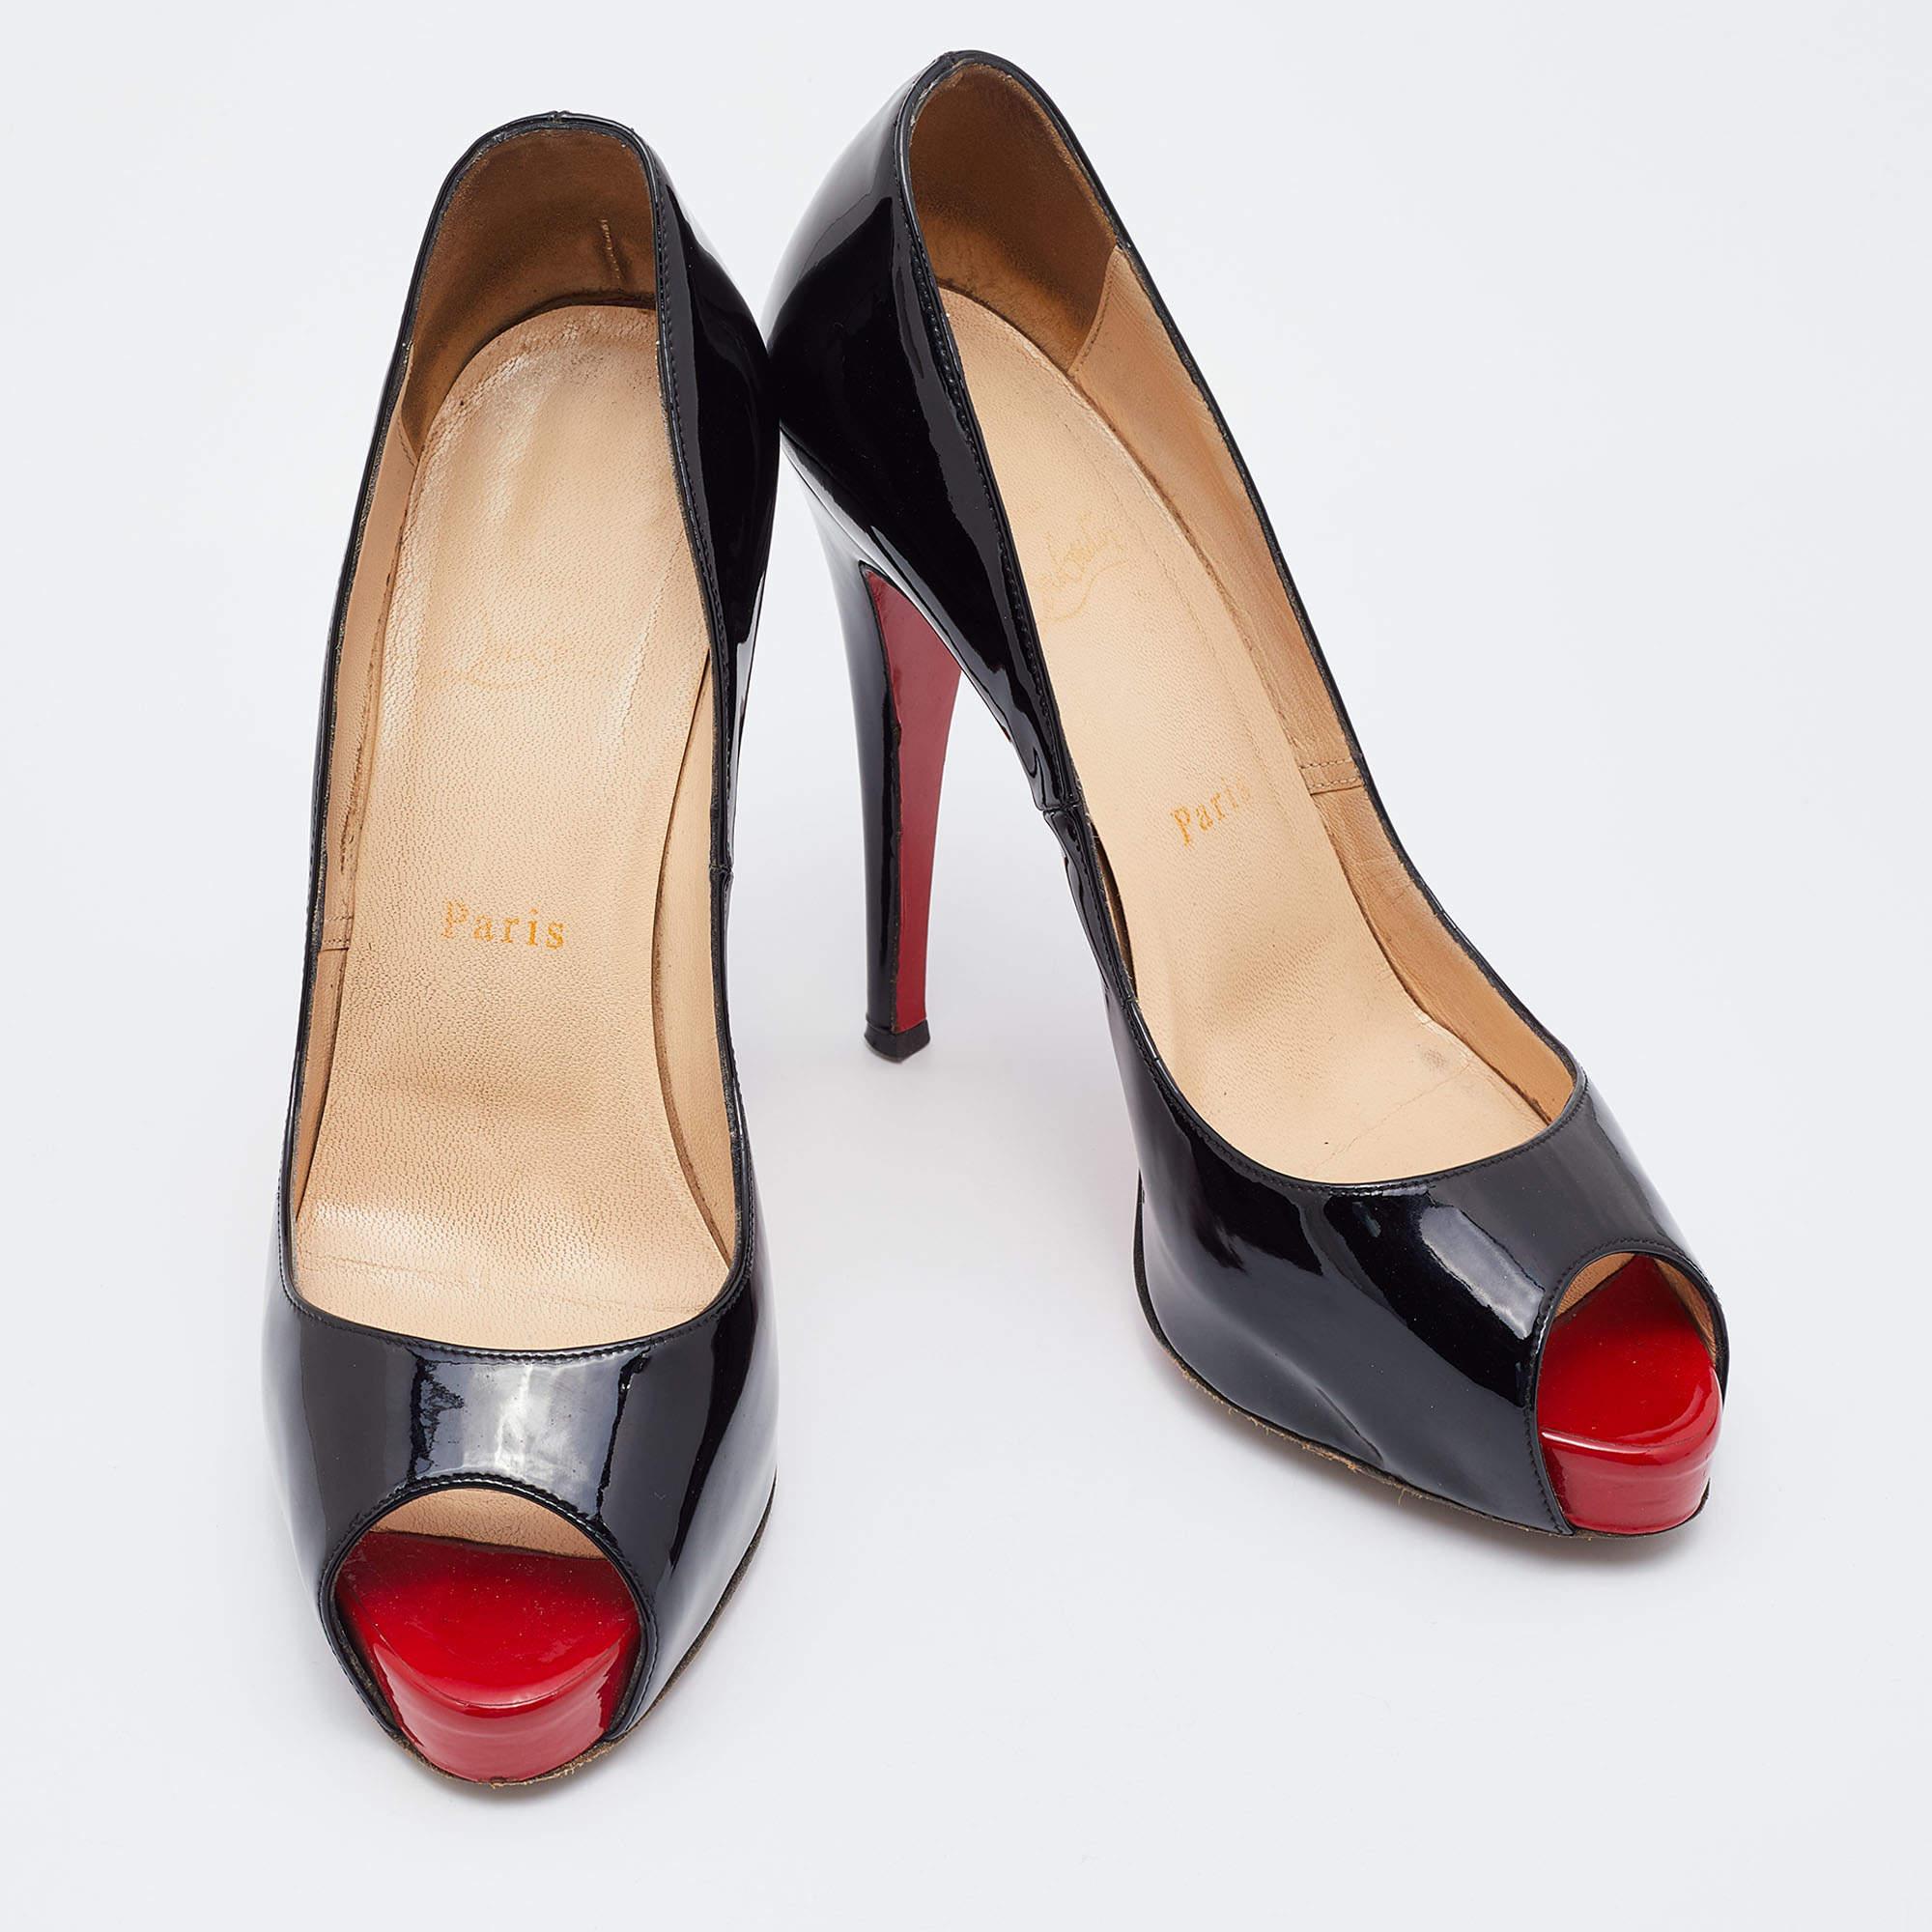 Christian Louboutin Black Patent Leather New Very Prive Pumps Size 39 For Sale 1